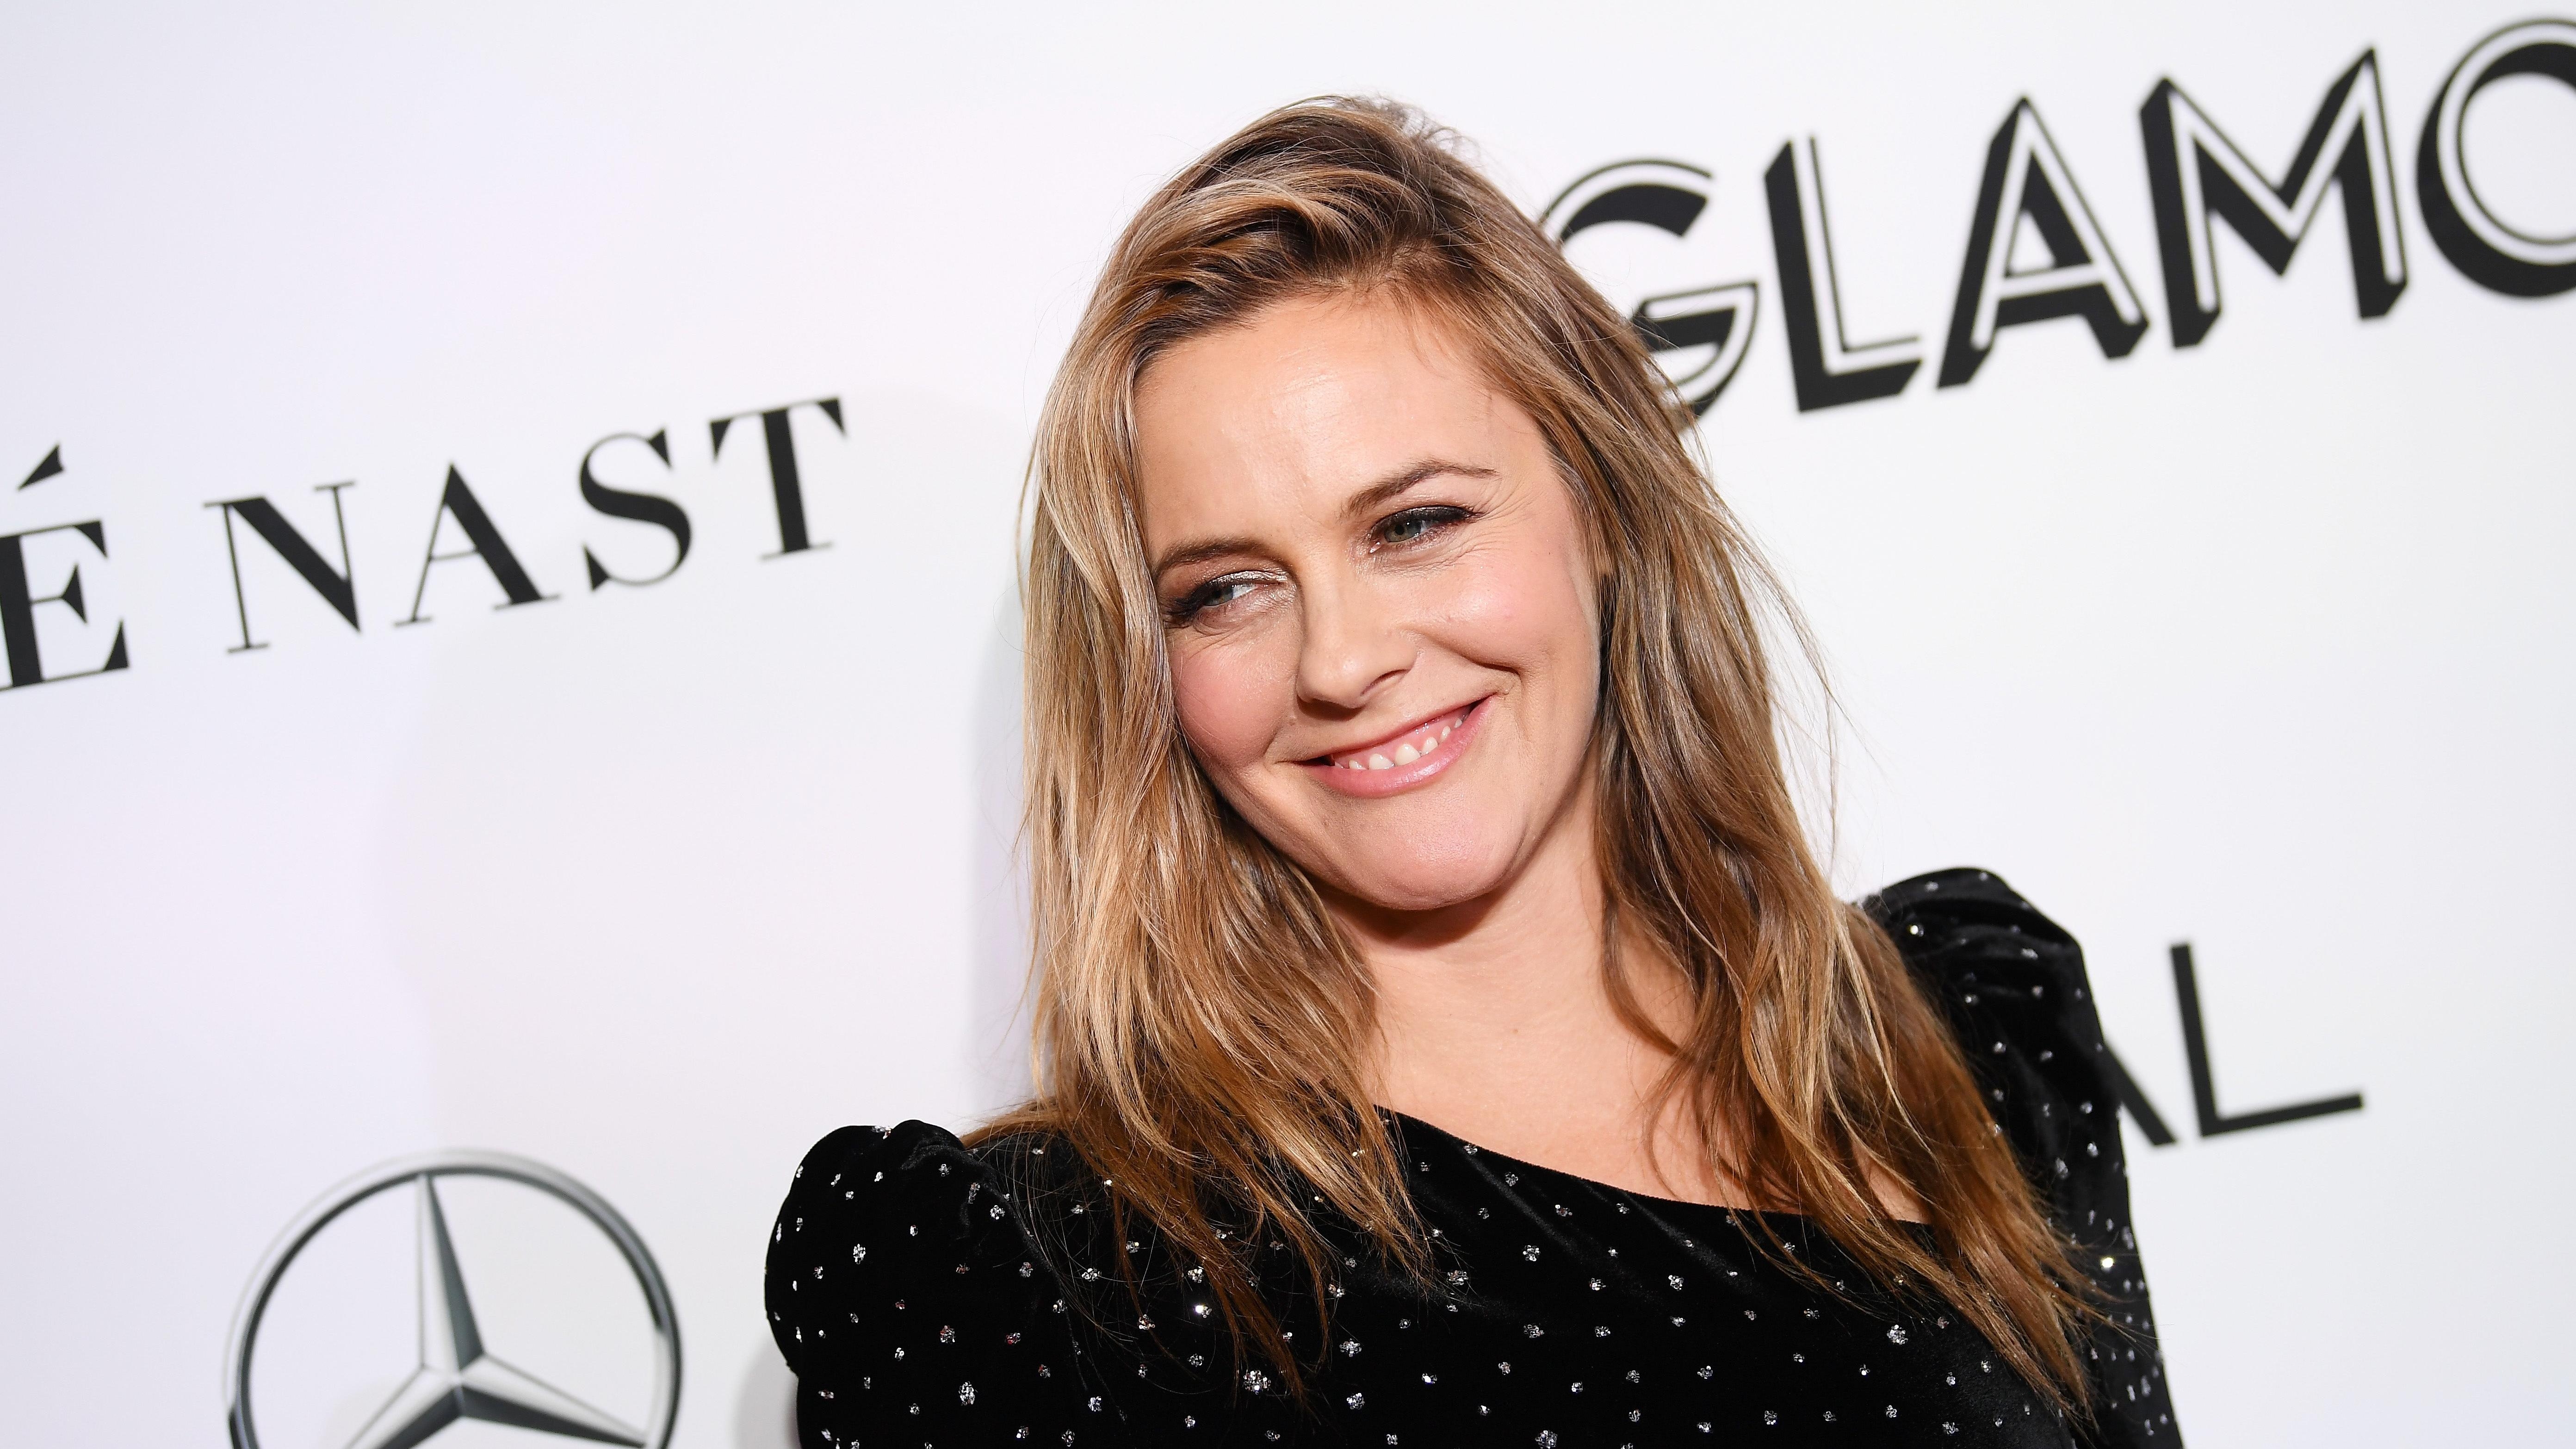 Alicia Silverstone returns to her high school comedy roots, joins the cast of Senior Year